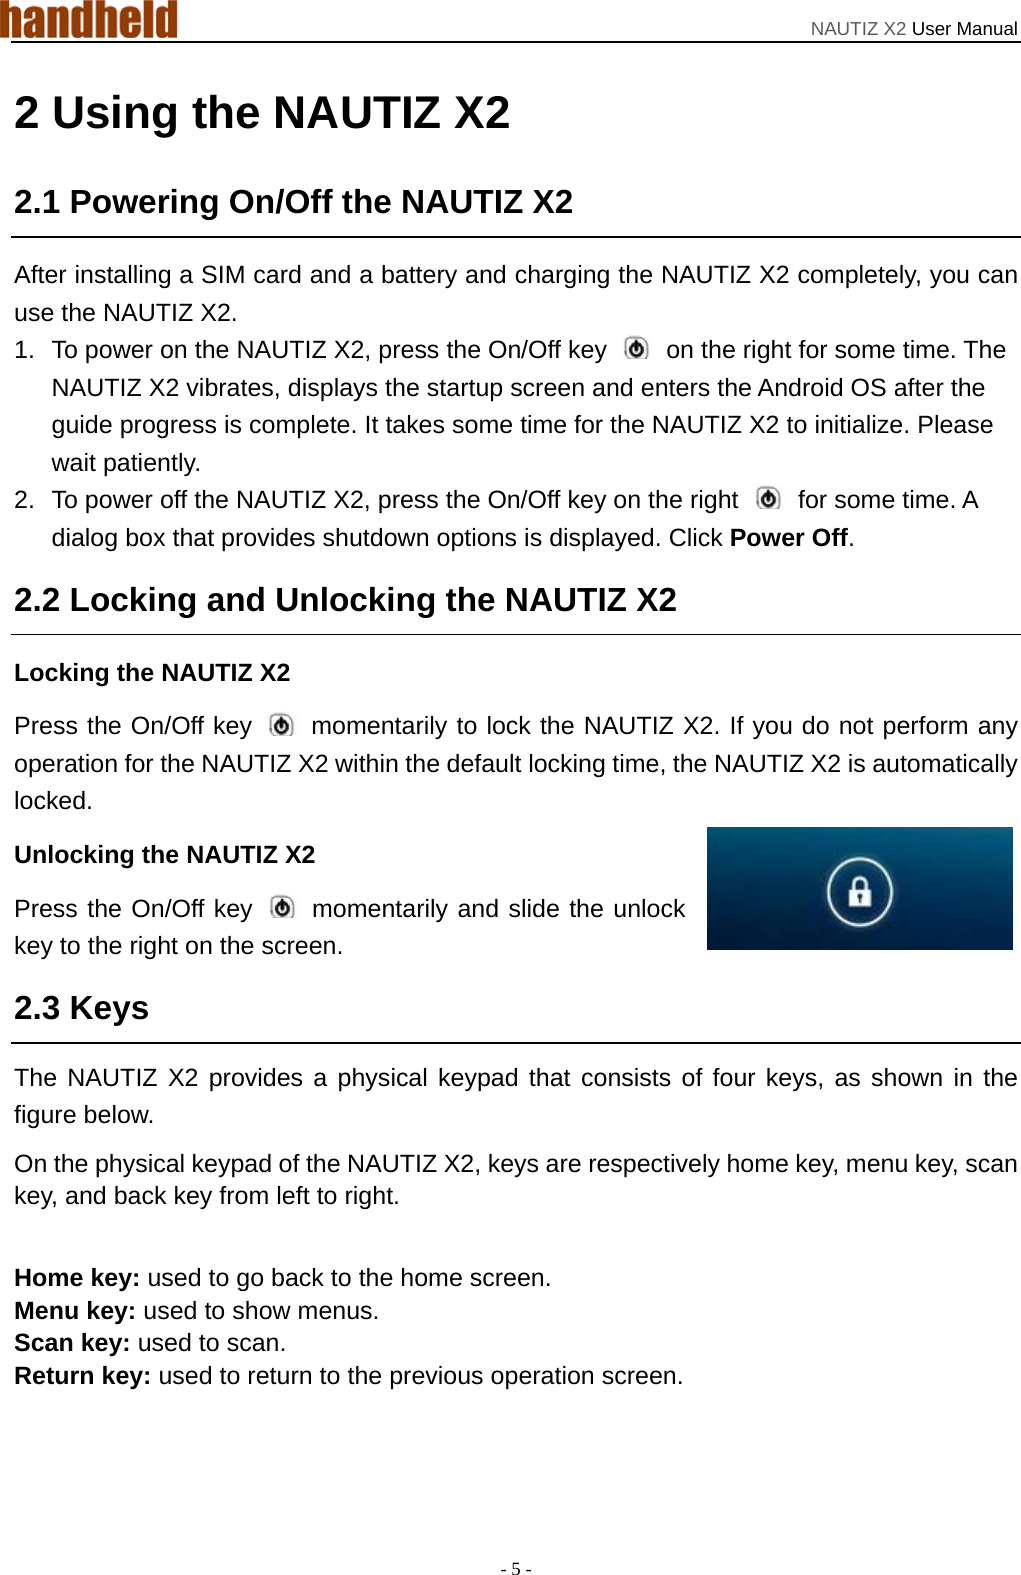 NAUTIZ X2 User Manual - 5 - 2 Using the NAUTIZ X2 2.1 Powering On/Off the NAUTIZ X2 After installing a SIM card and a battery and charging the NAUTIZ X2 completely, you can use the NAUTIZ X2. 1.  To power on the NAUTIZ X2, press the On/Off key    on the right for some time. The NAUTIZ X2 vibrates, displays the startup screen and enters the Android OS after the guide progress is complete. It takes some time for the NAUTIZ X2 to initialize. Please wait patiently. 2.  To power off the NAUTIZ X2, press the On/Off key on the right    for some time. A dialog box that provides shutdown options is displayed. Click Power Off. 2.2 Locking and Unlocking the NAUTIZ X2 Locking the NAUTIZ X2 Press the On/Off key   momentarily to lock the NAUTIZ X2. If you do not perform any operation for the NAUTIZ X2 within the default locking time, the NAUTIZ X2 is automatically locked. Unlocking the NAUTIZ X2 Press the On/Off key   momentarily and slide the unlock key to the right on the screen.   2.3 Keys The NAUTIZ X2 provides a physical keypad that consists of four keys, as shown in the figure below. On the physical keypad of the NAUTIZ X2, keys are respectively home key, menu key, scan key, and back key from left to right.  Home key: used to go back to the home screen. Menu key: used to show menus. Scan key: used to scan. Return key: used to return to the previous operation screen. 